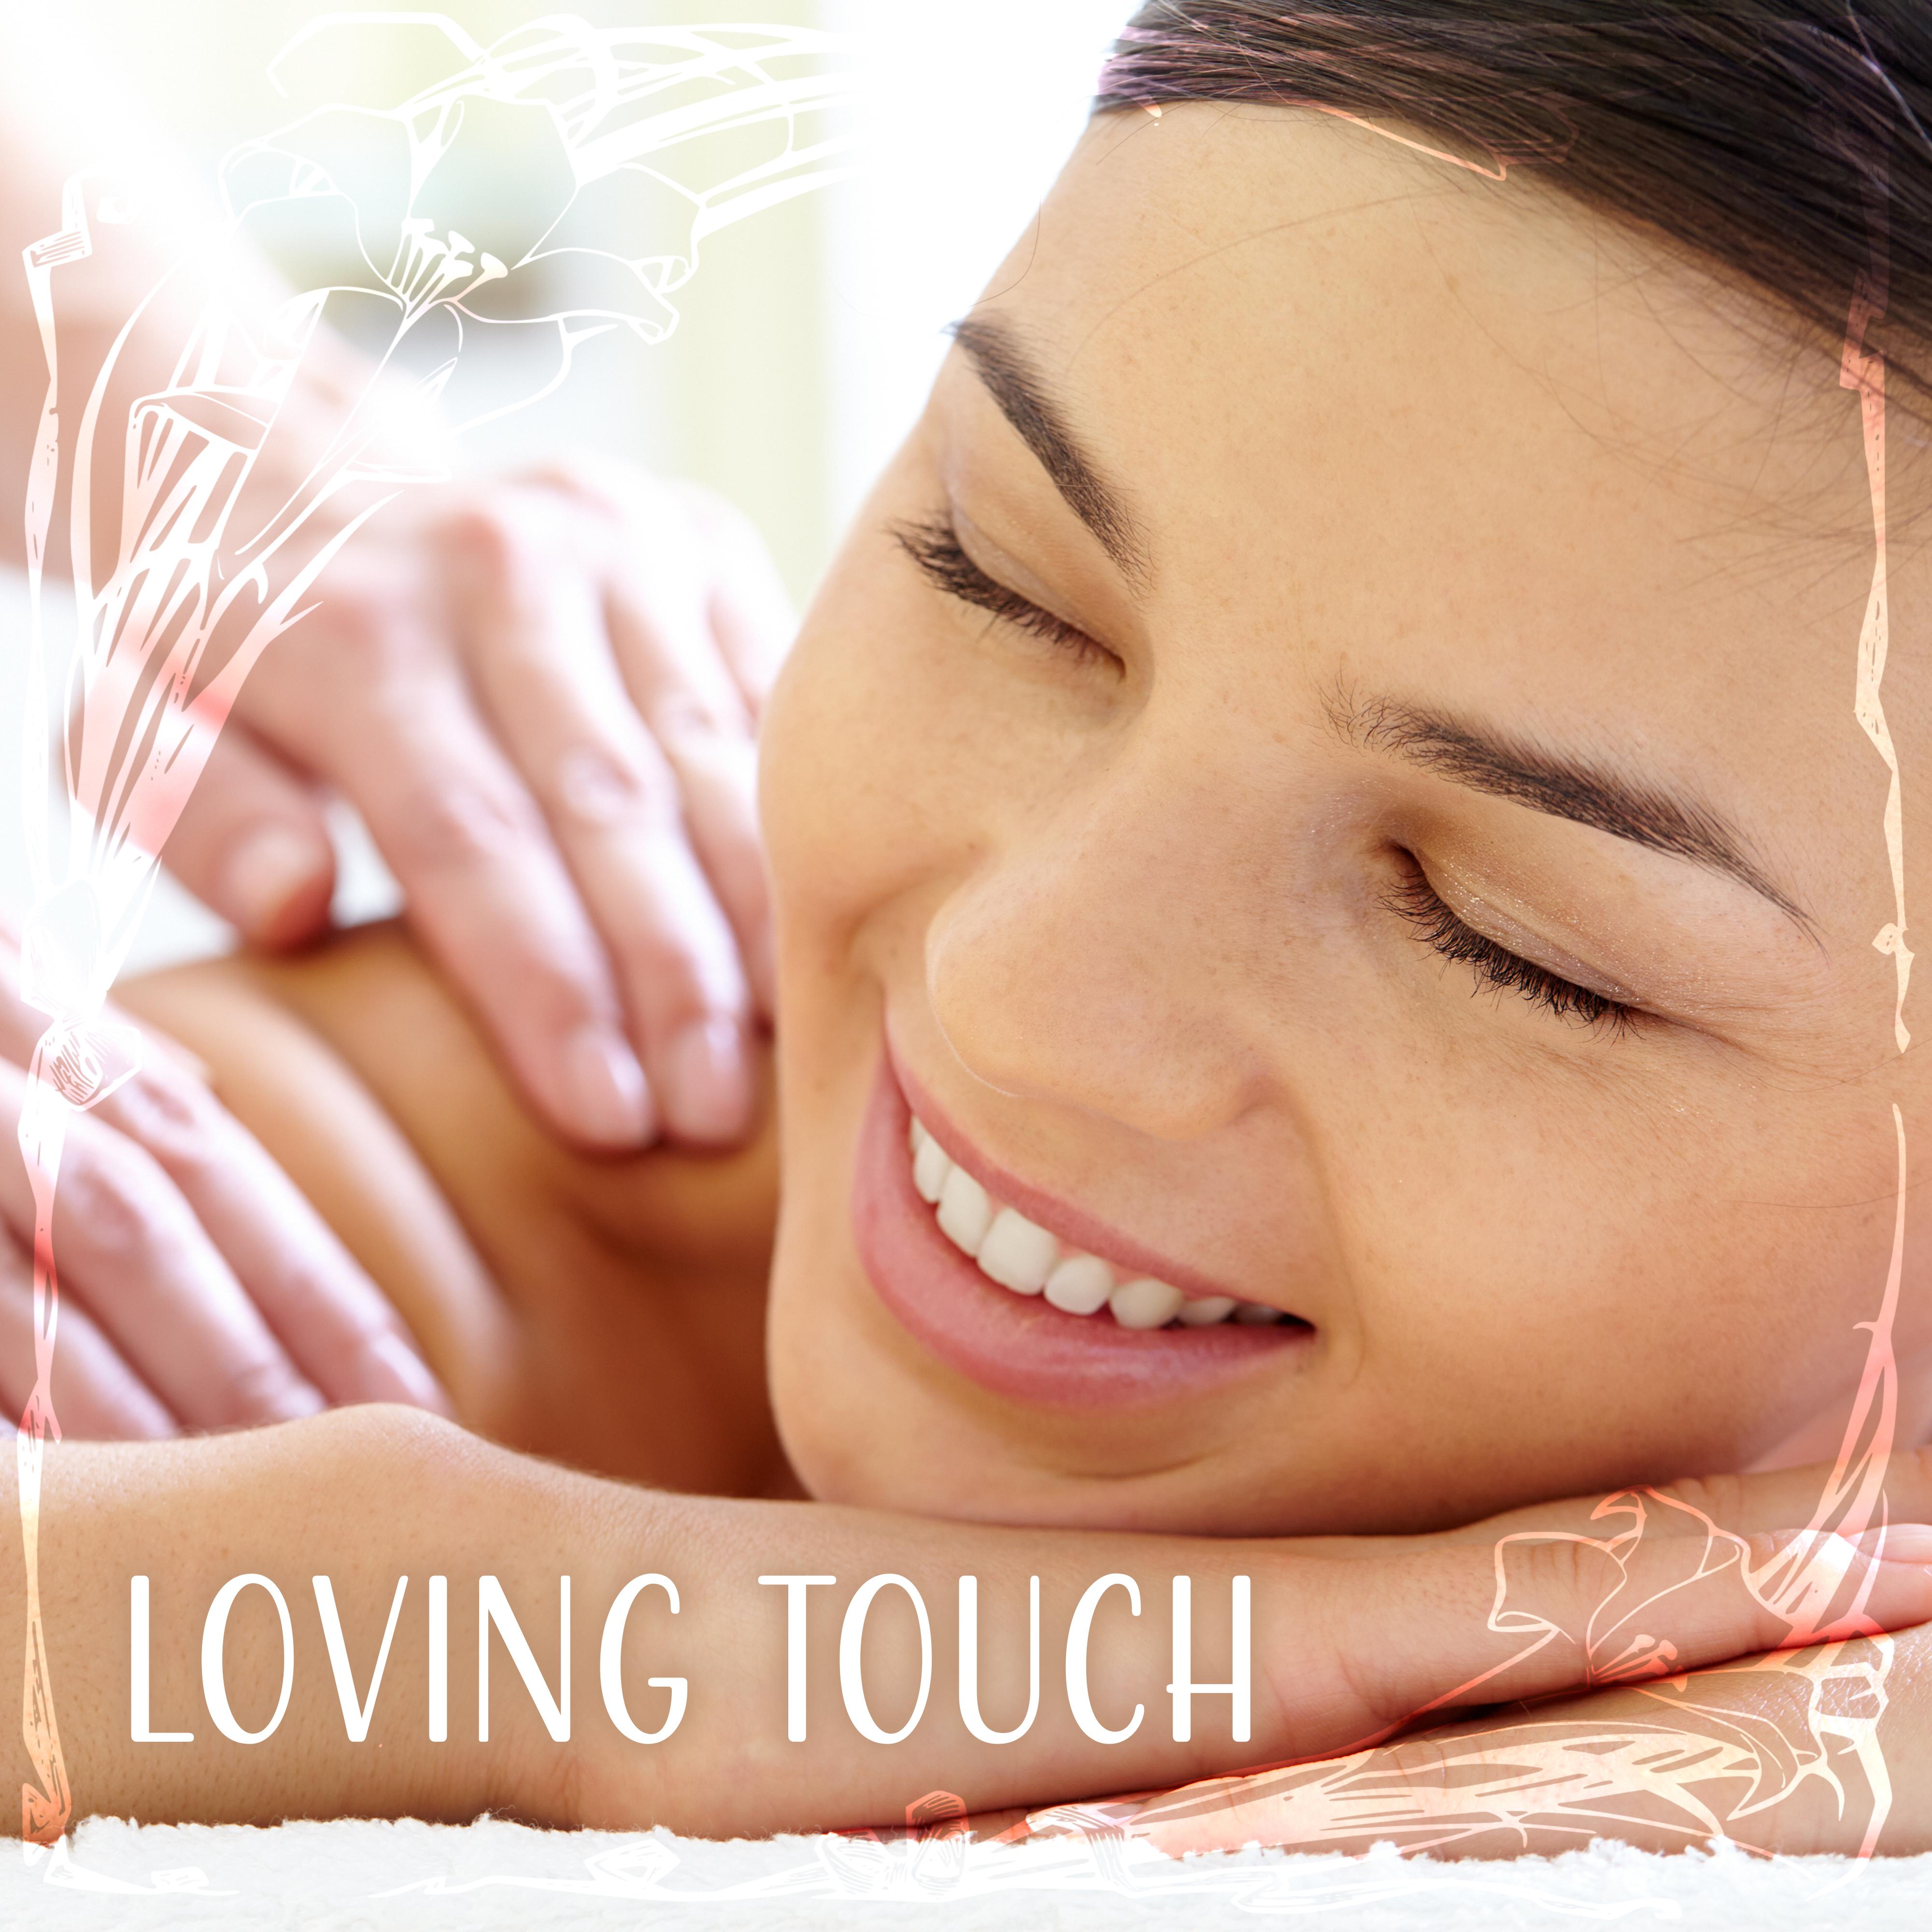 Loving Touch – Massage Music, Deep Relaxation, Spa, Healing Sounds of Nature, Spa Music, Pure Instrumental Sounds, Birds and Water